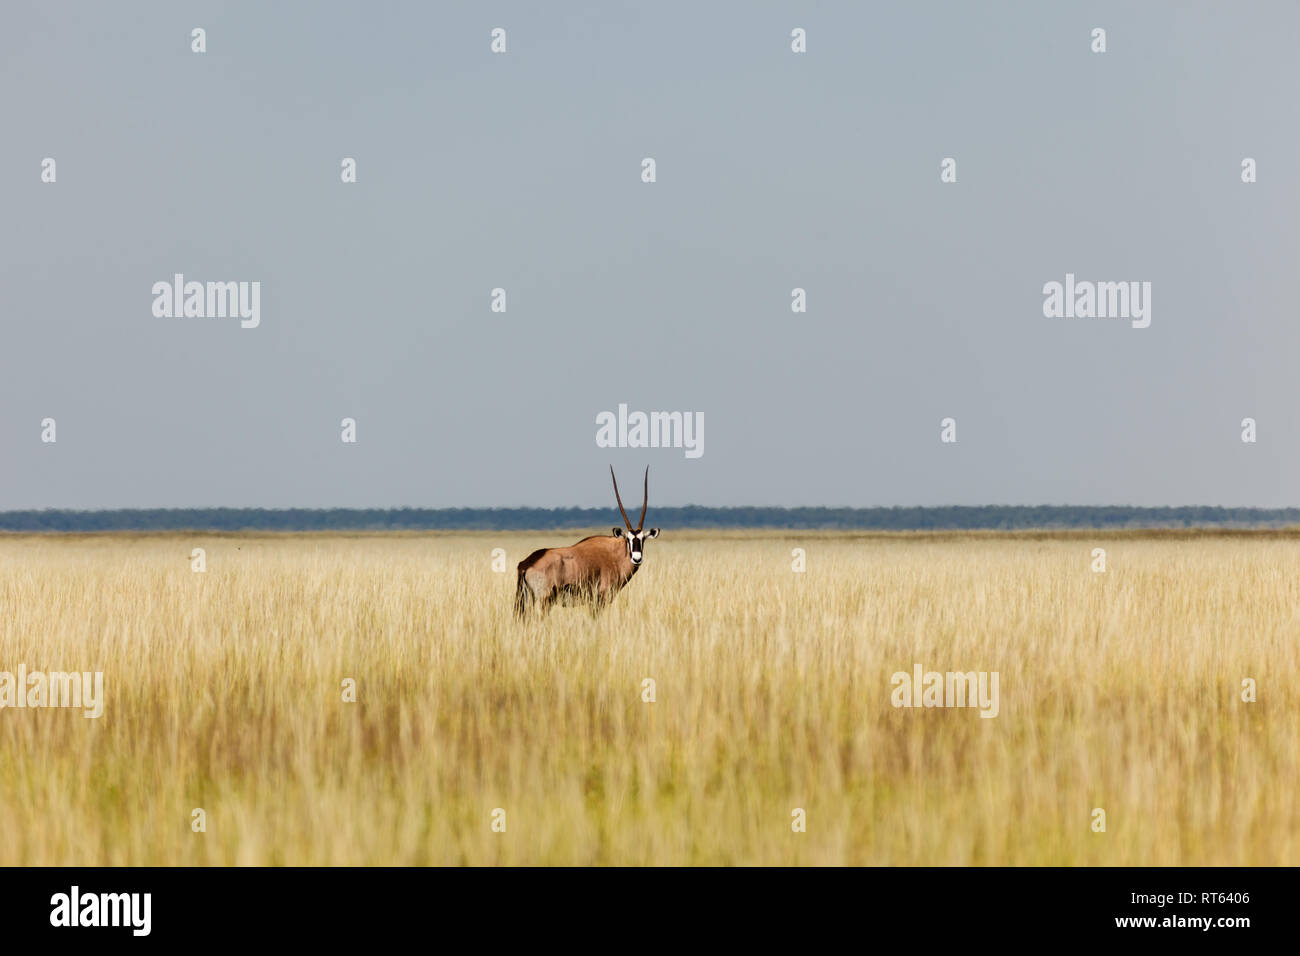 Gemsbok, Oryx gazella, with straight horns pauses in grazing in grass field in Namibia Stock Photo